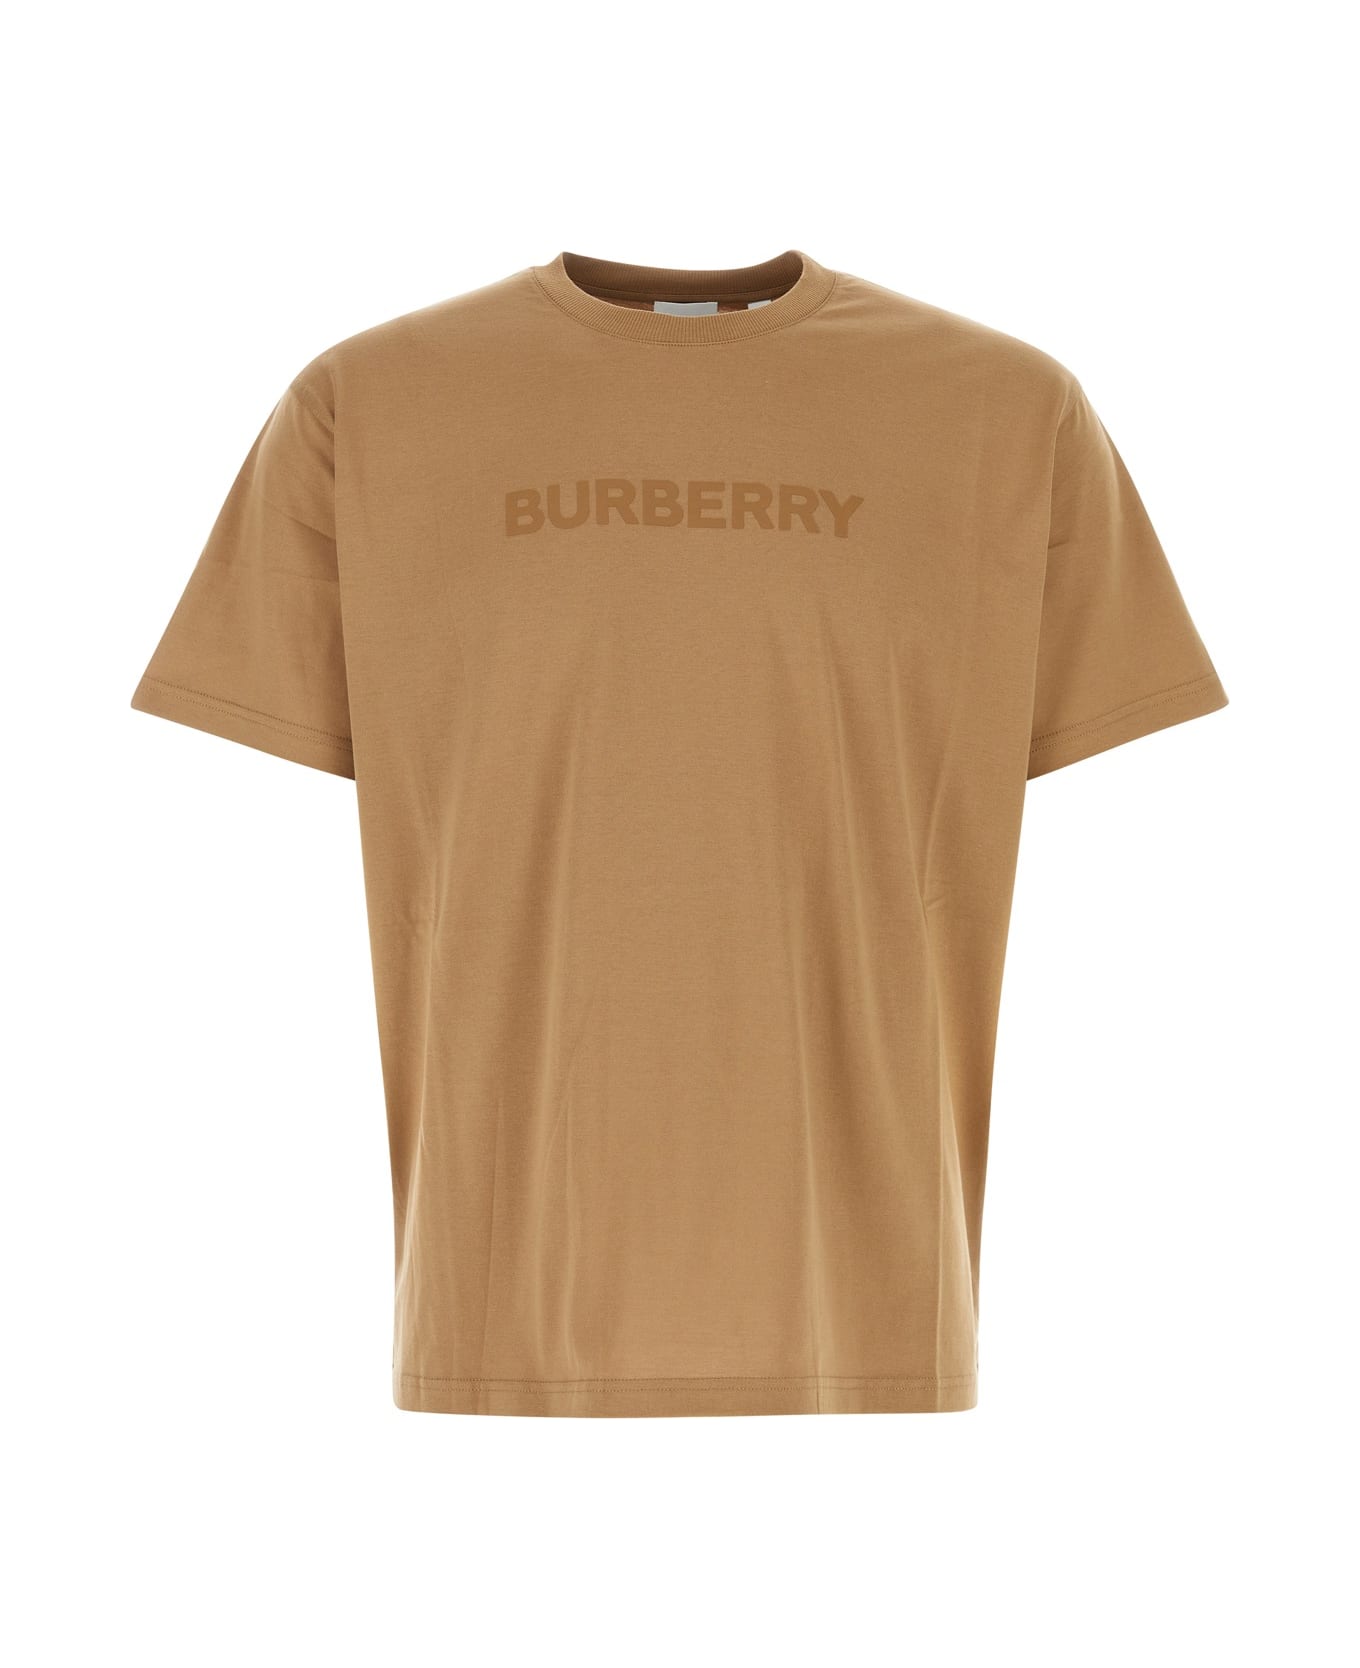 Burberry Biscuit Cotton T-shirt - CAMEL